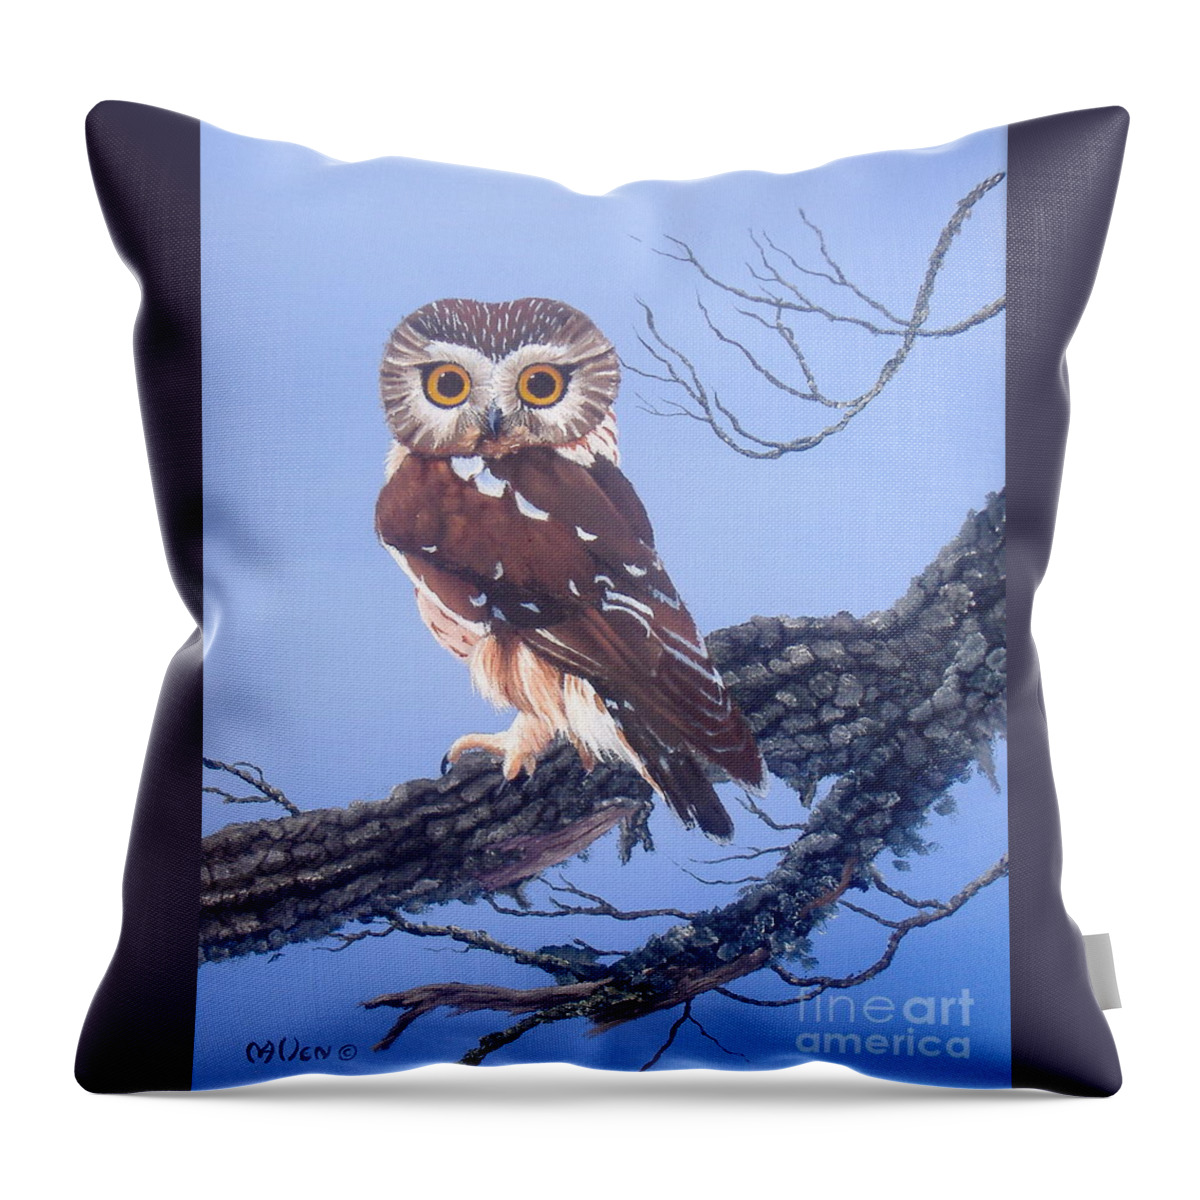 Owl Paintings Throw Pillow featuring the painting Who Me? II by Michael Allen